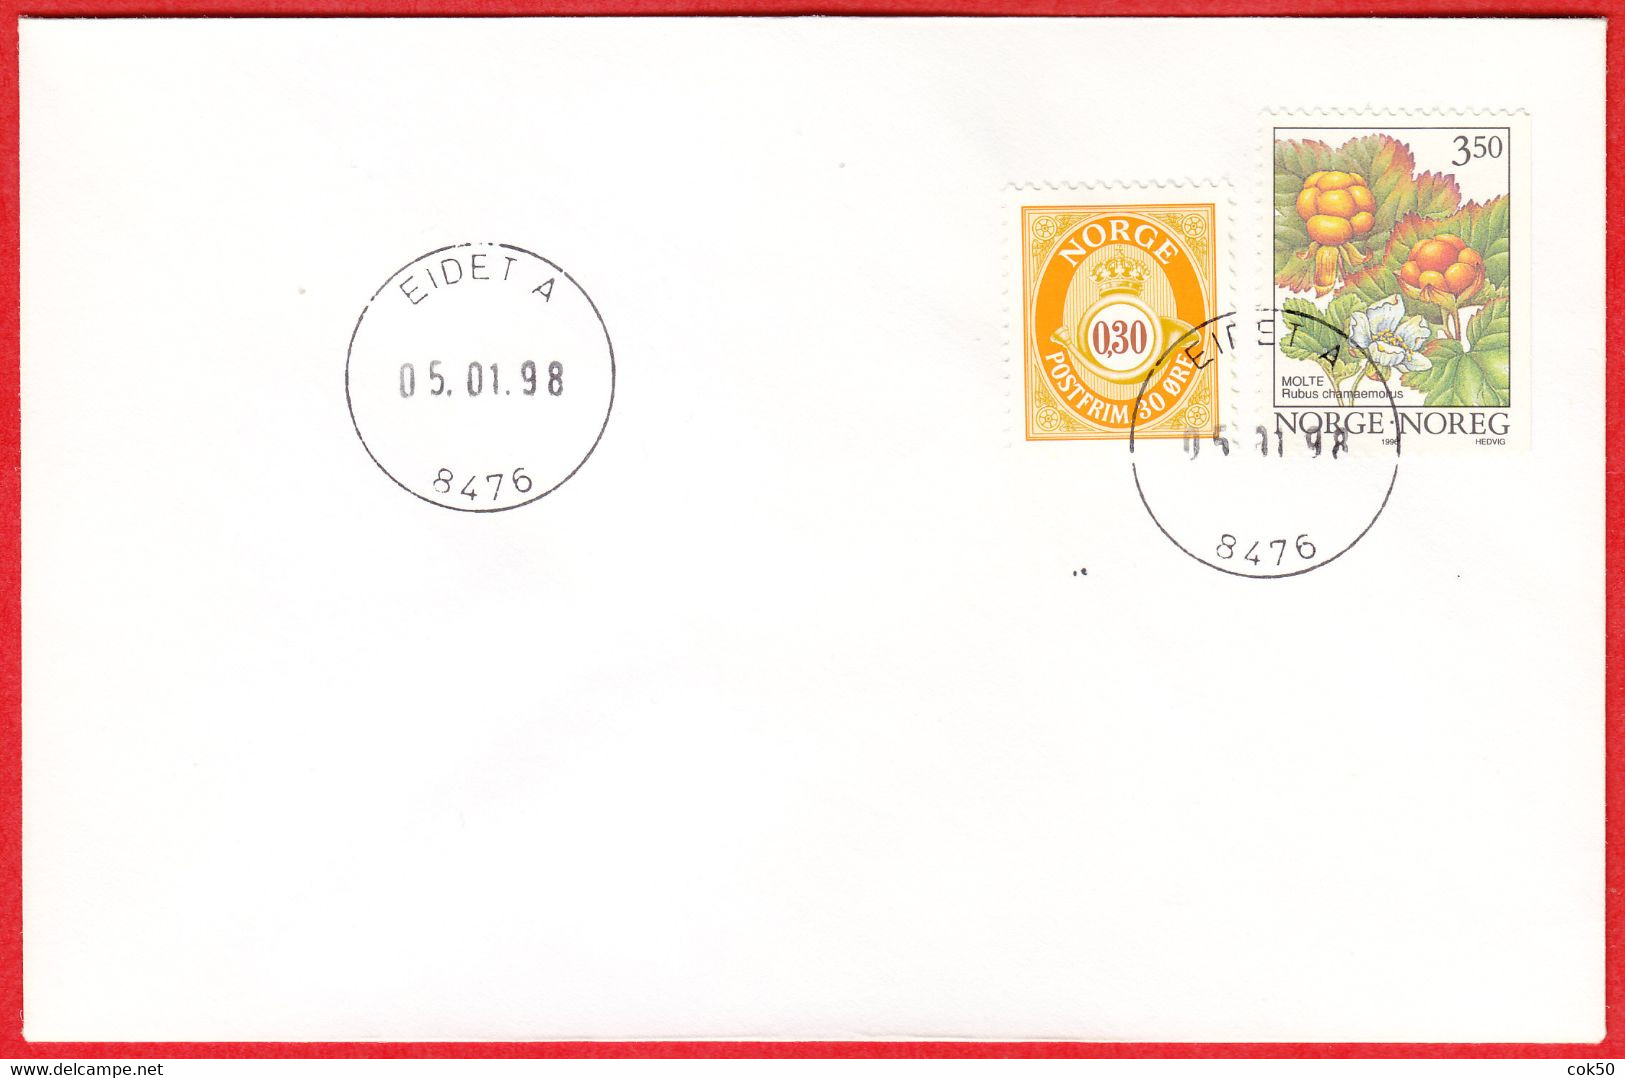 NORWAY -  8476 EIDET A (Nordland County) - Last Day/postoffice Closed On 1998.01.05 - Local Post Stamps